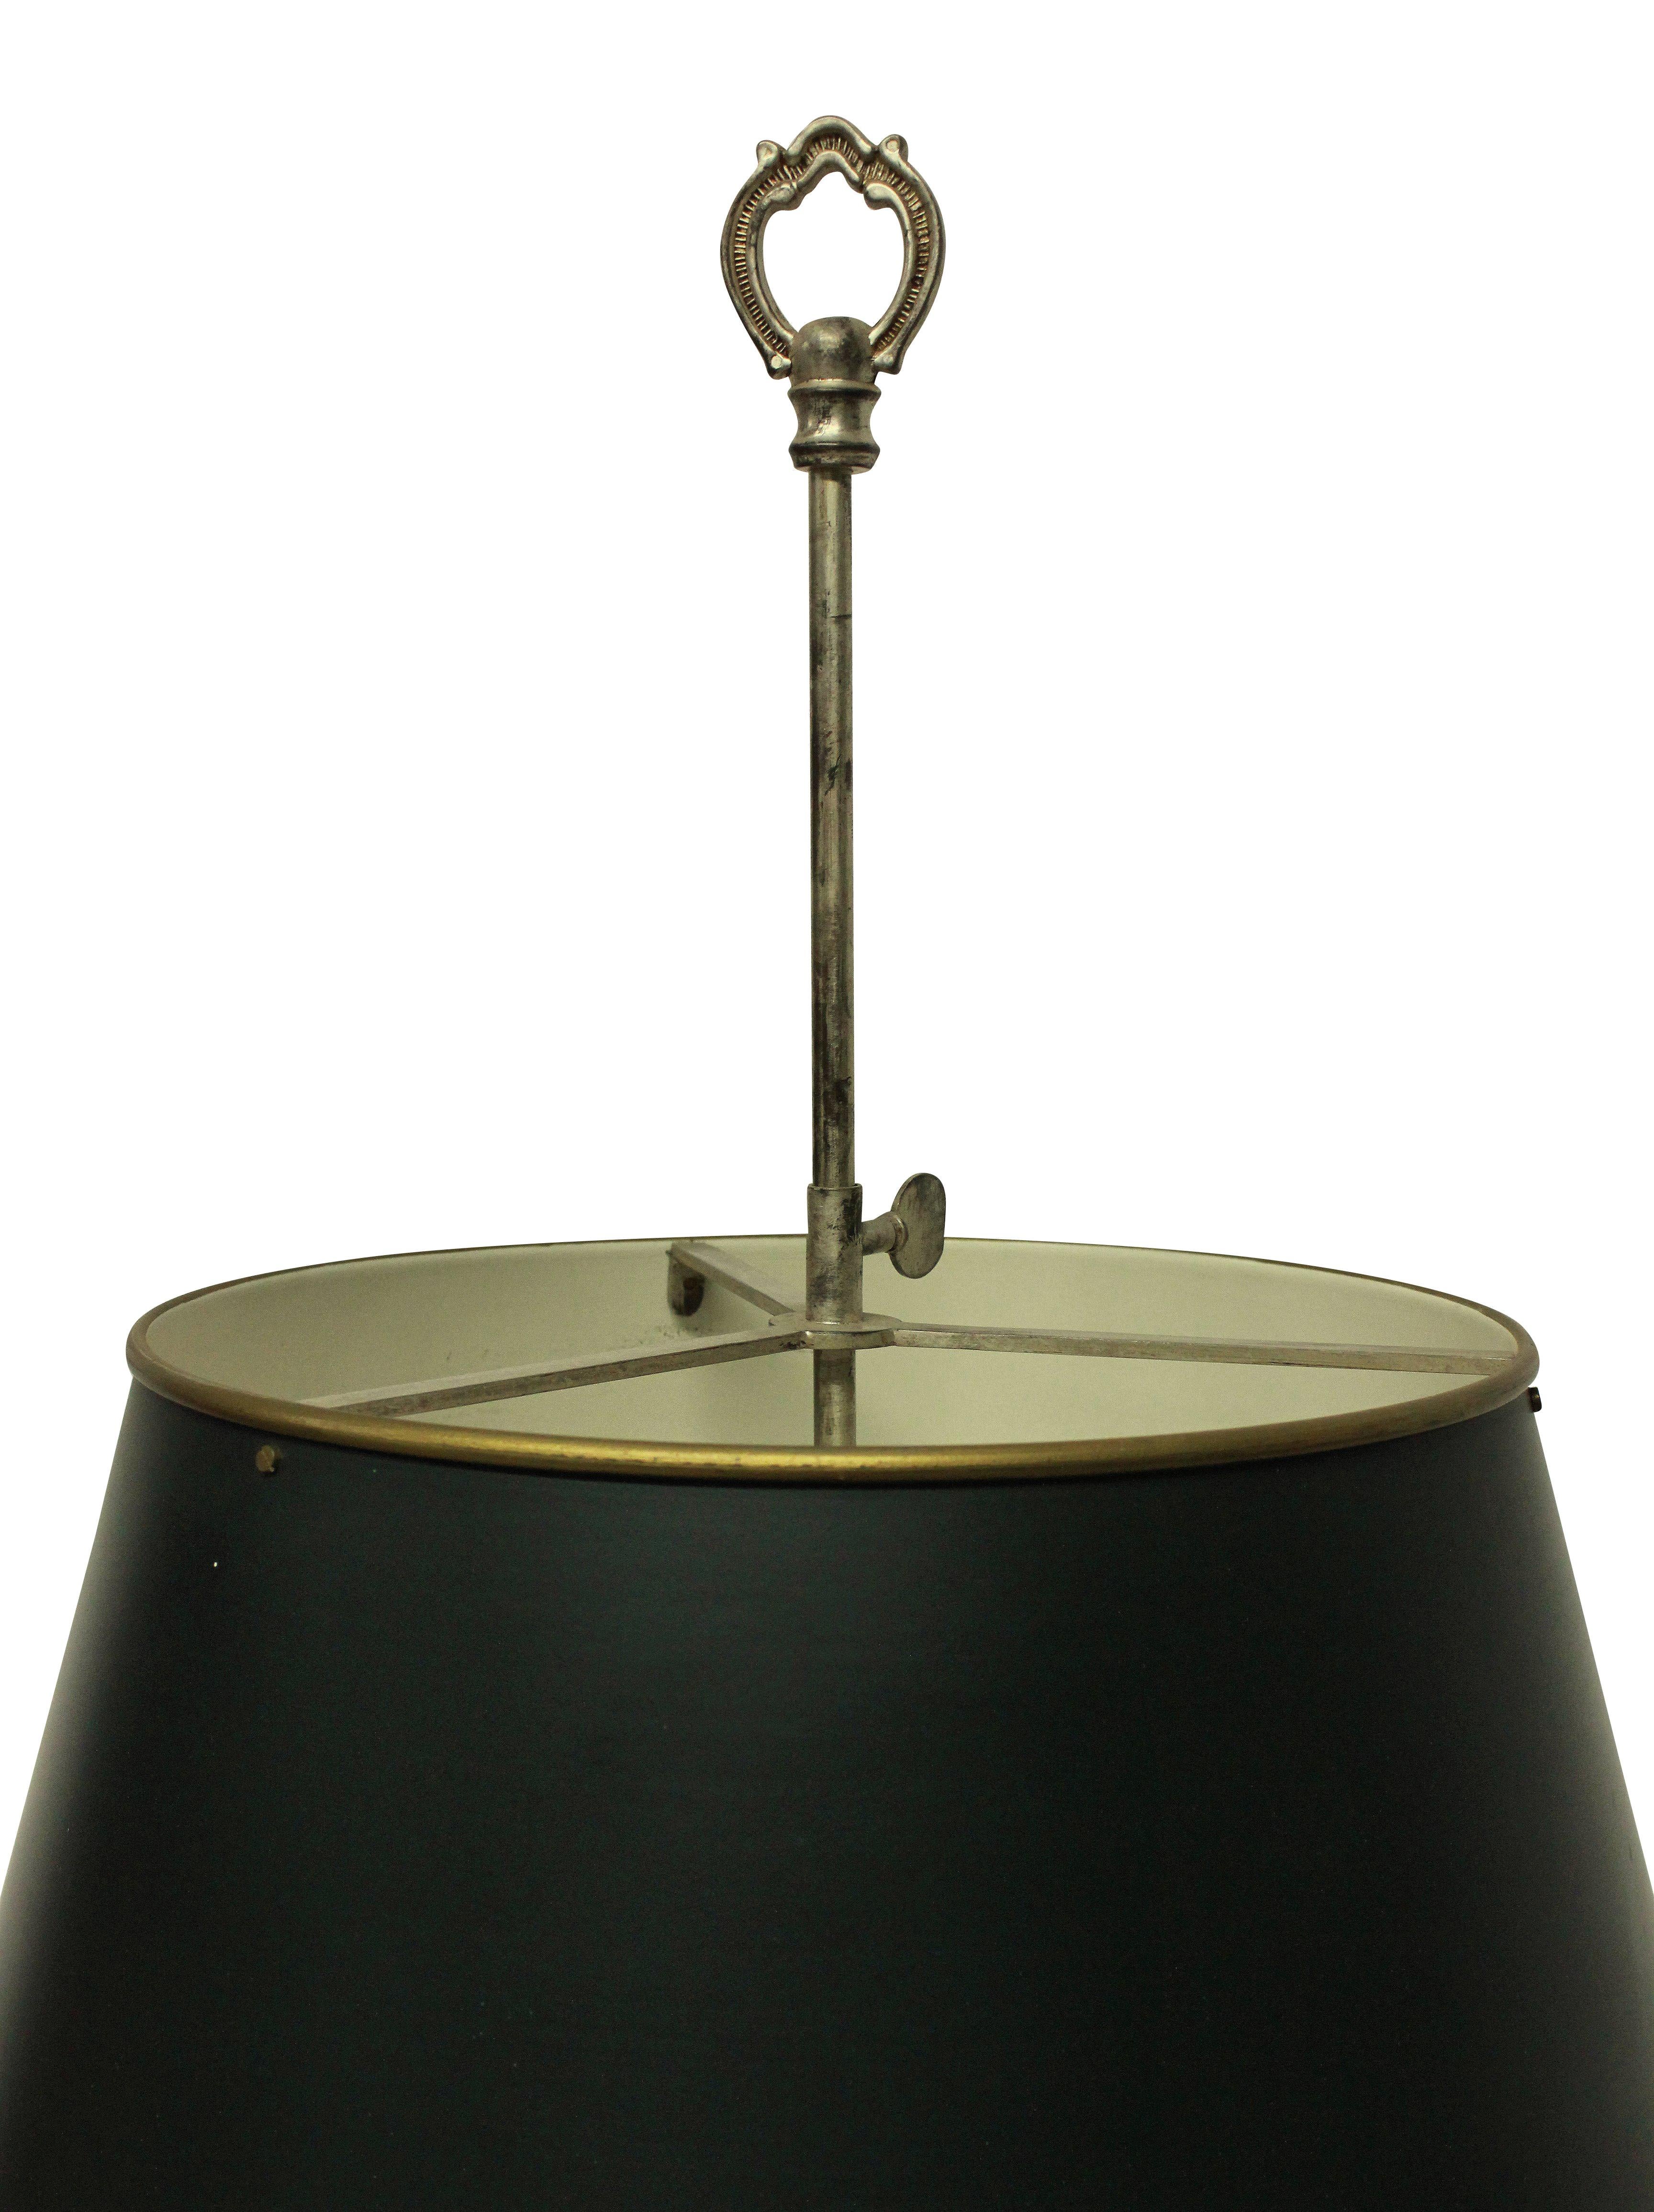 Silvered English Silver Plated Bronze Bouillotte Lamp